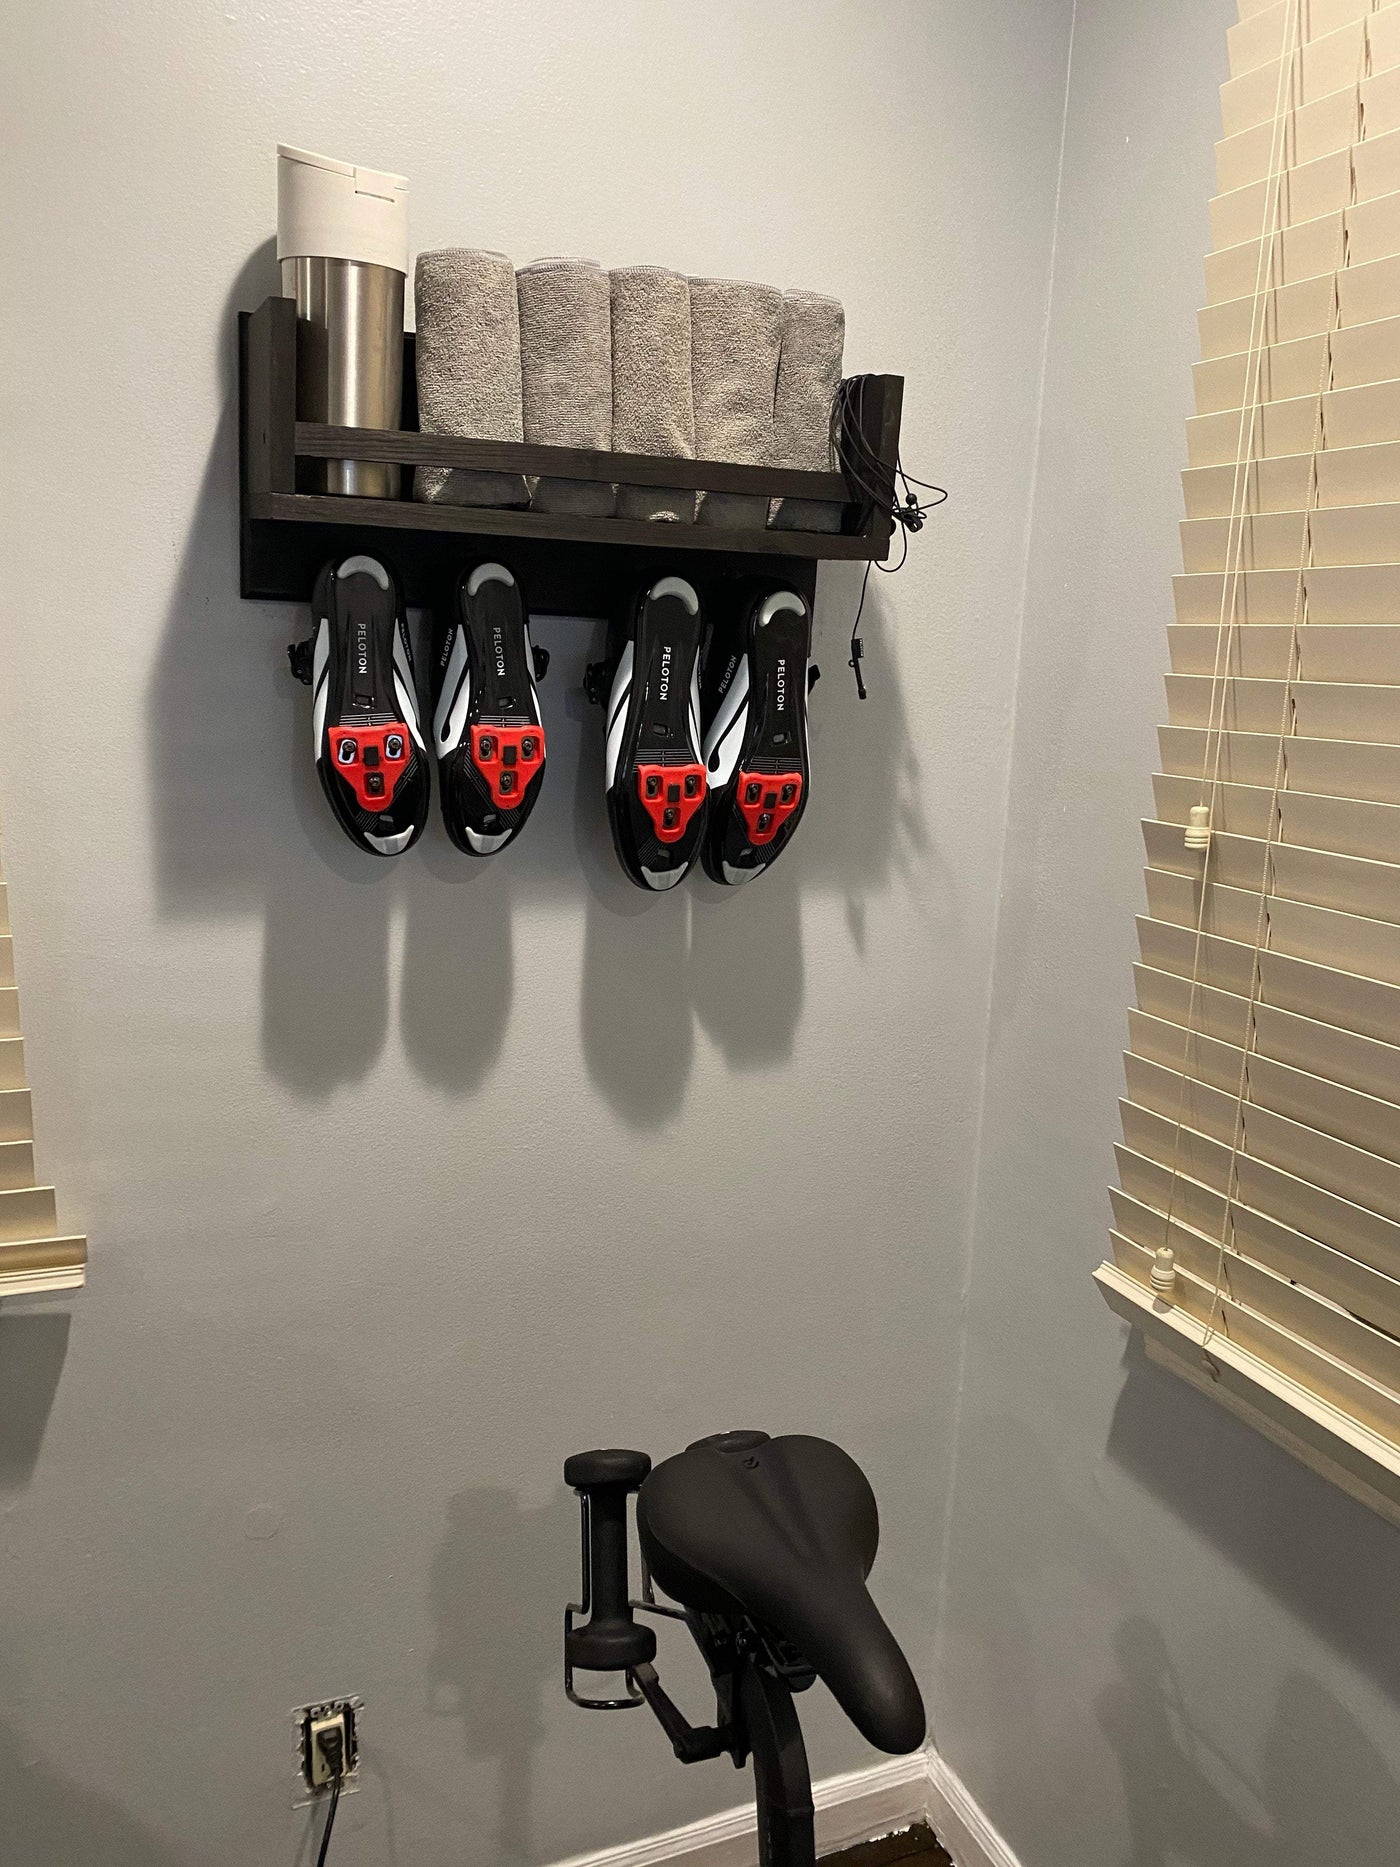 Exercise Home Gym Shoe and Towel Shelf Cycling Shoe Shelf Exercise Shoe  Storage Shelf Fitness Shelf Home Gym Shoe Shelf Bike Shelf 